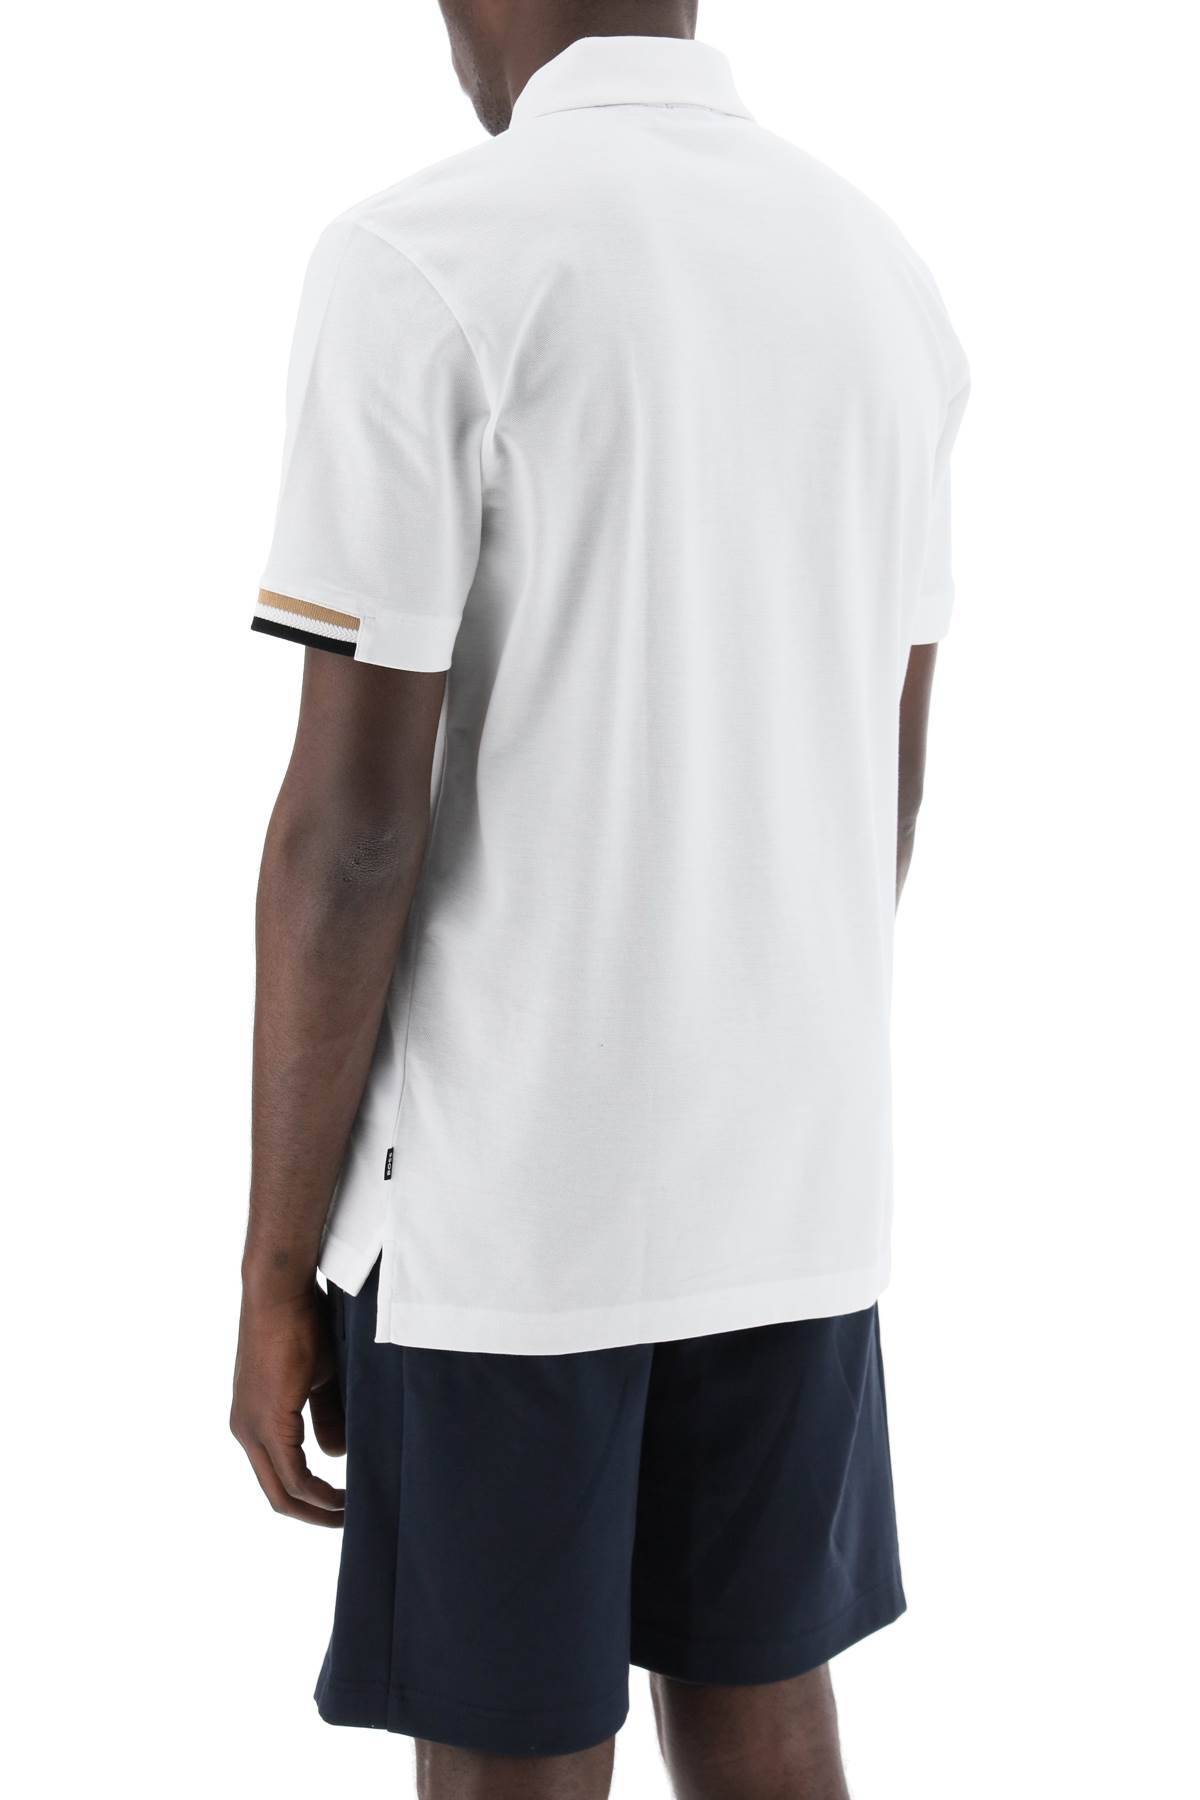 Shop Hugo Boss Parlay Polo Shirt With Stripe Detail In White